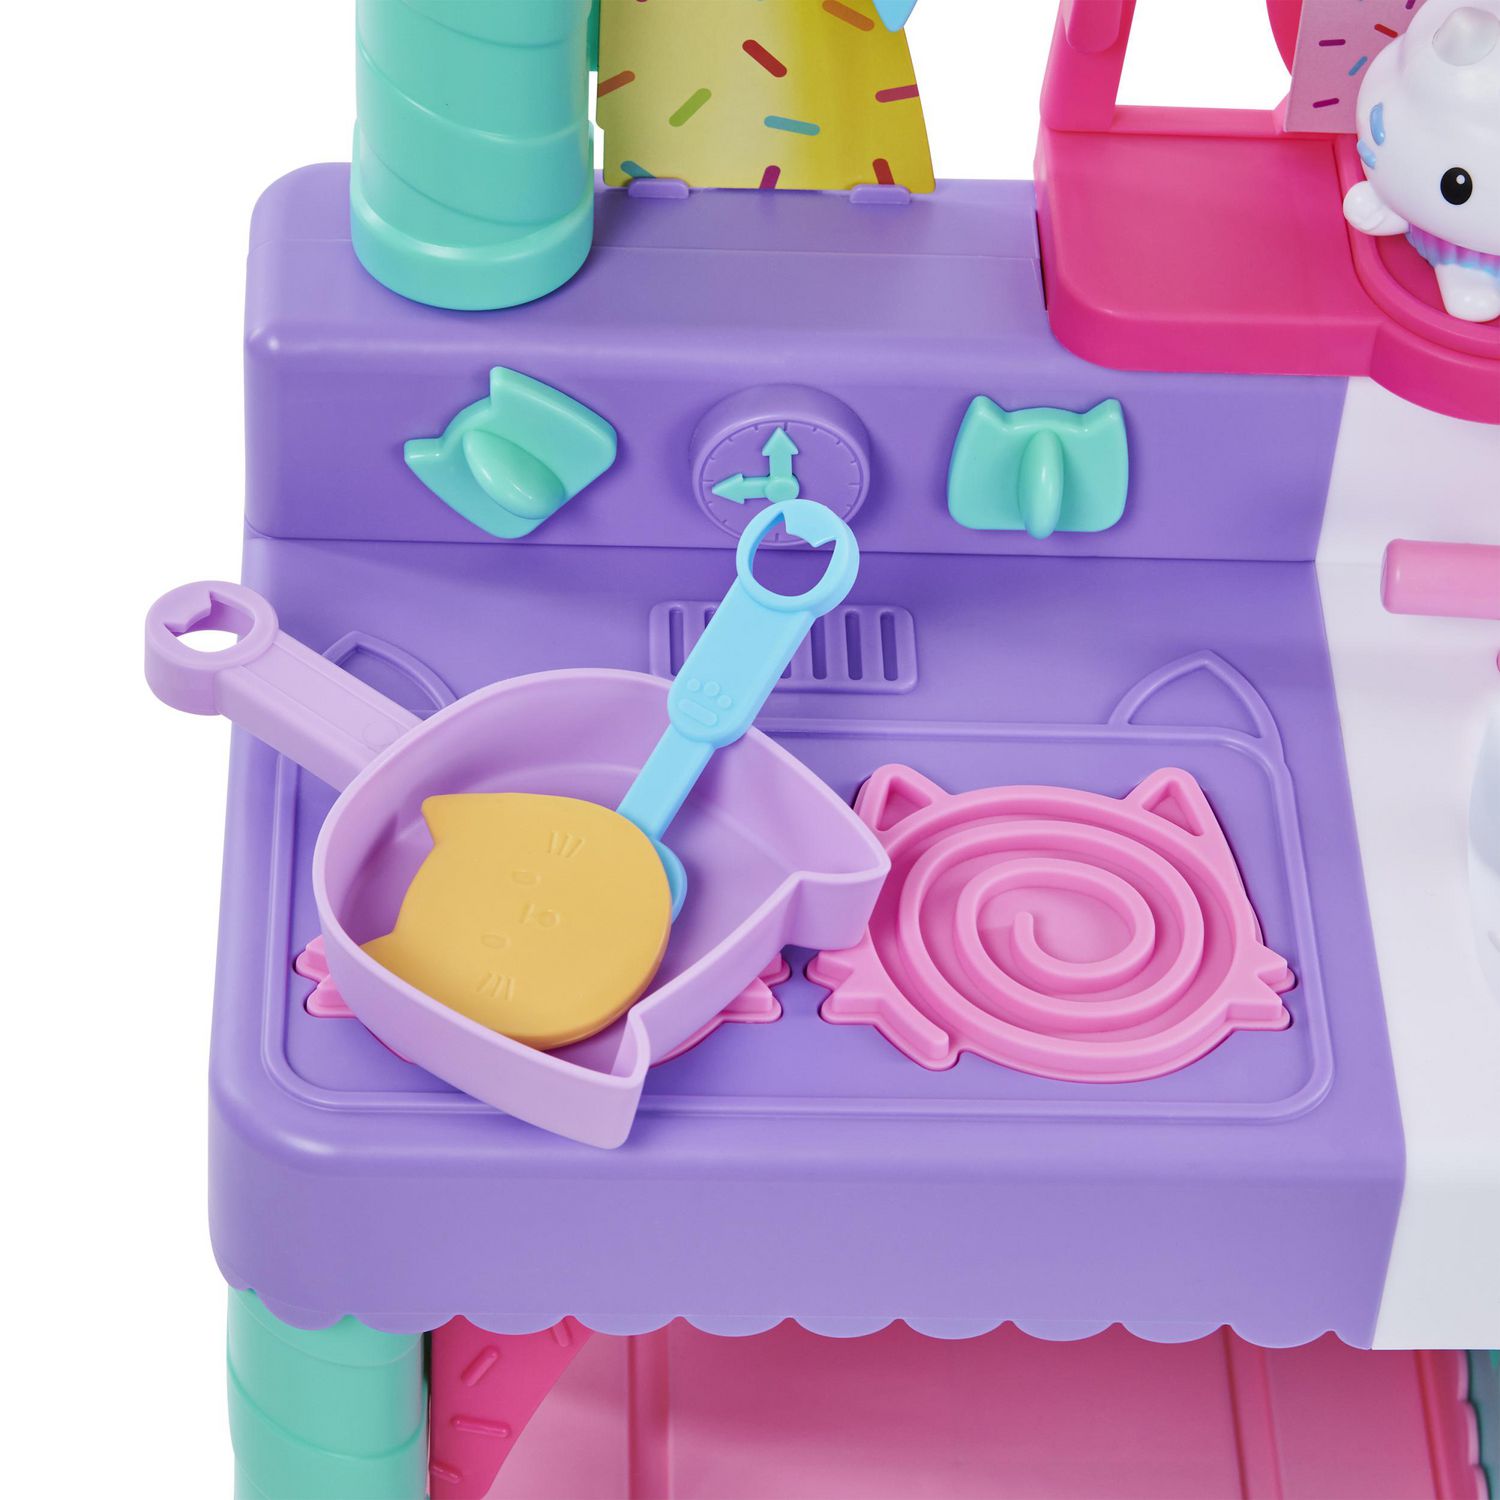 Gabby's Dollhouse, Cakey Kitchen Set for Kids with Play Kitchen